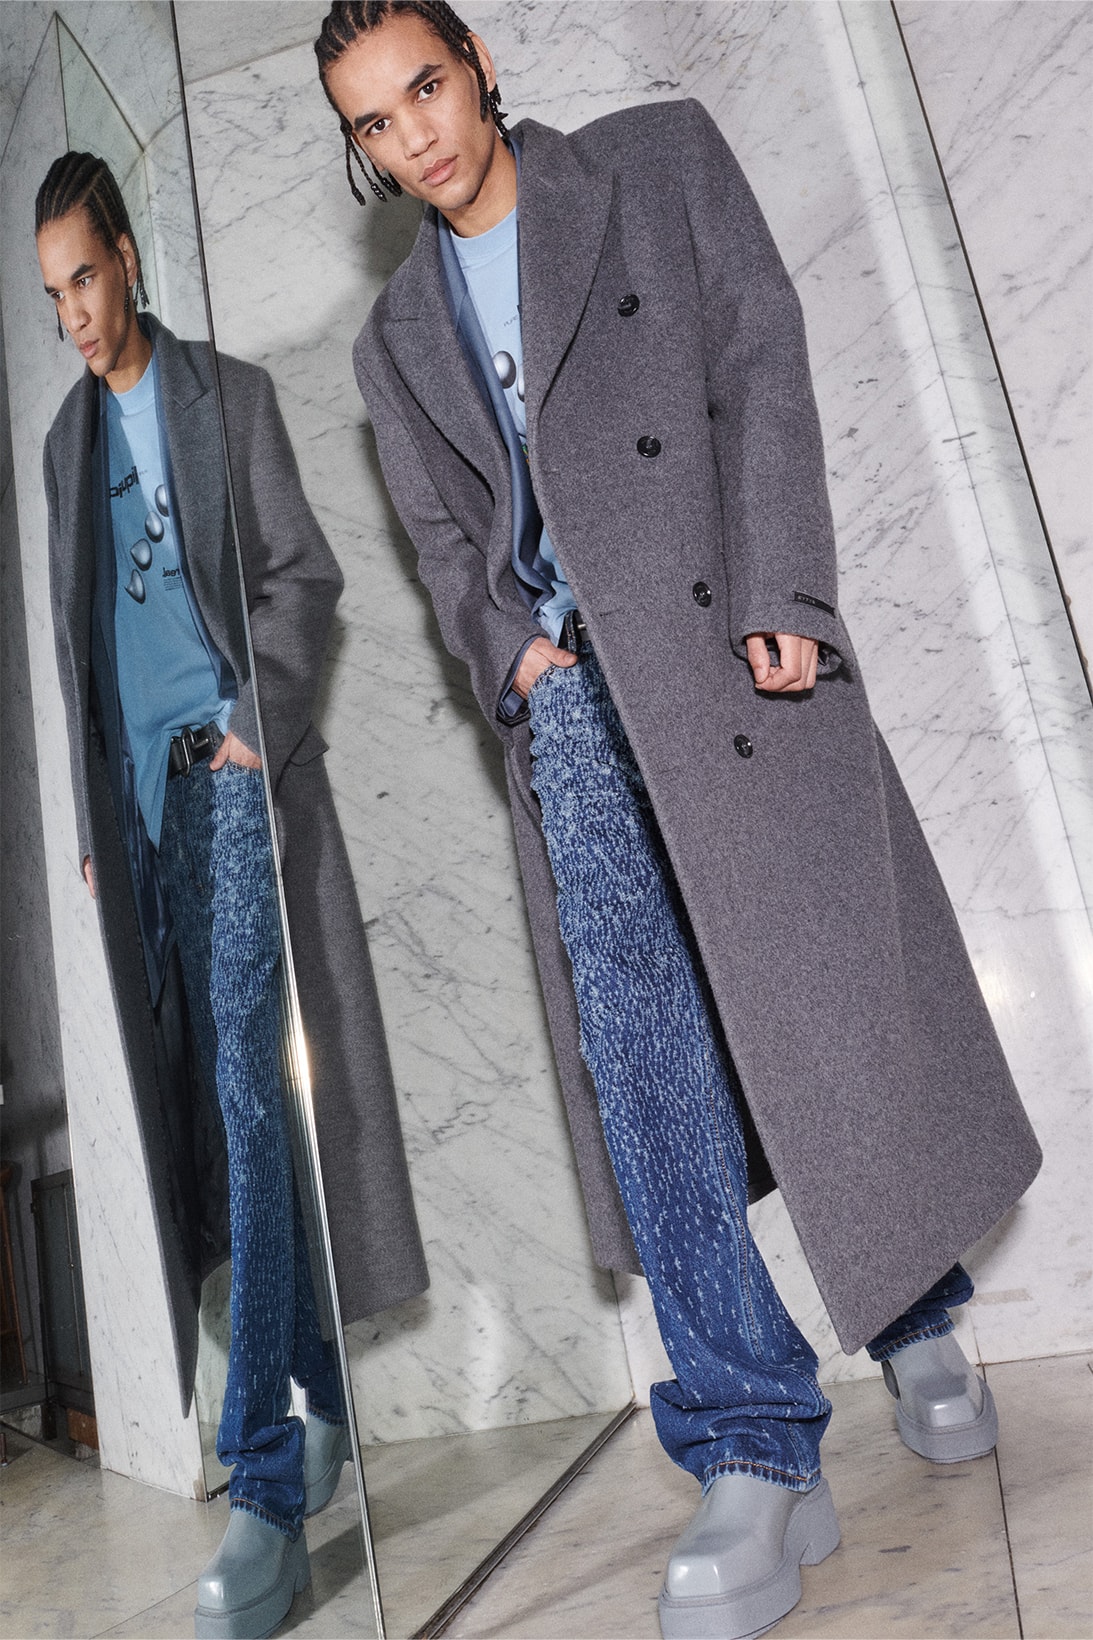 eytys fall collection blu rider jeans boots lookbook images gray coat